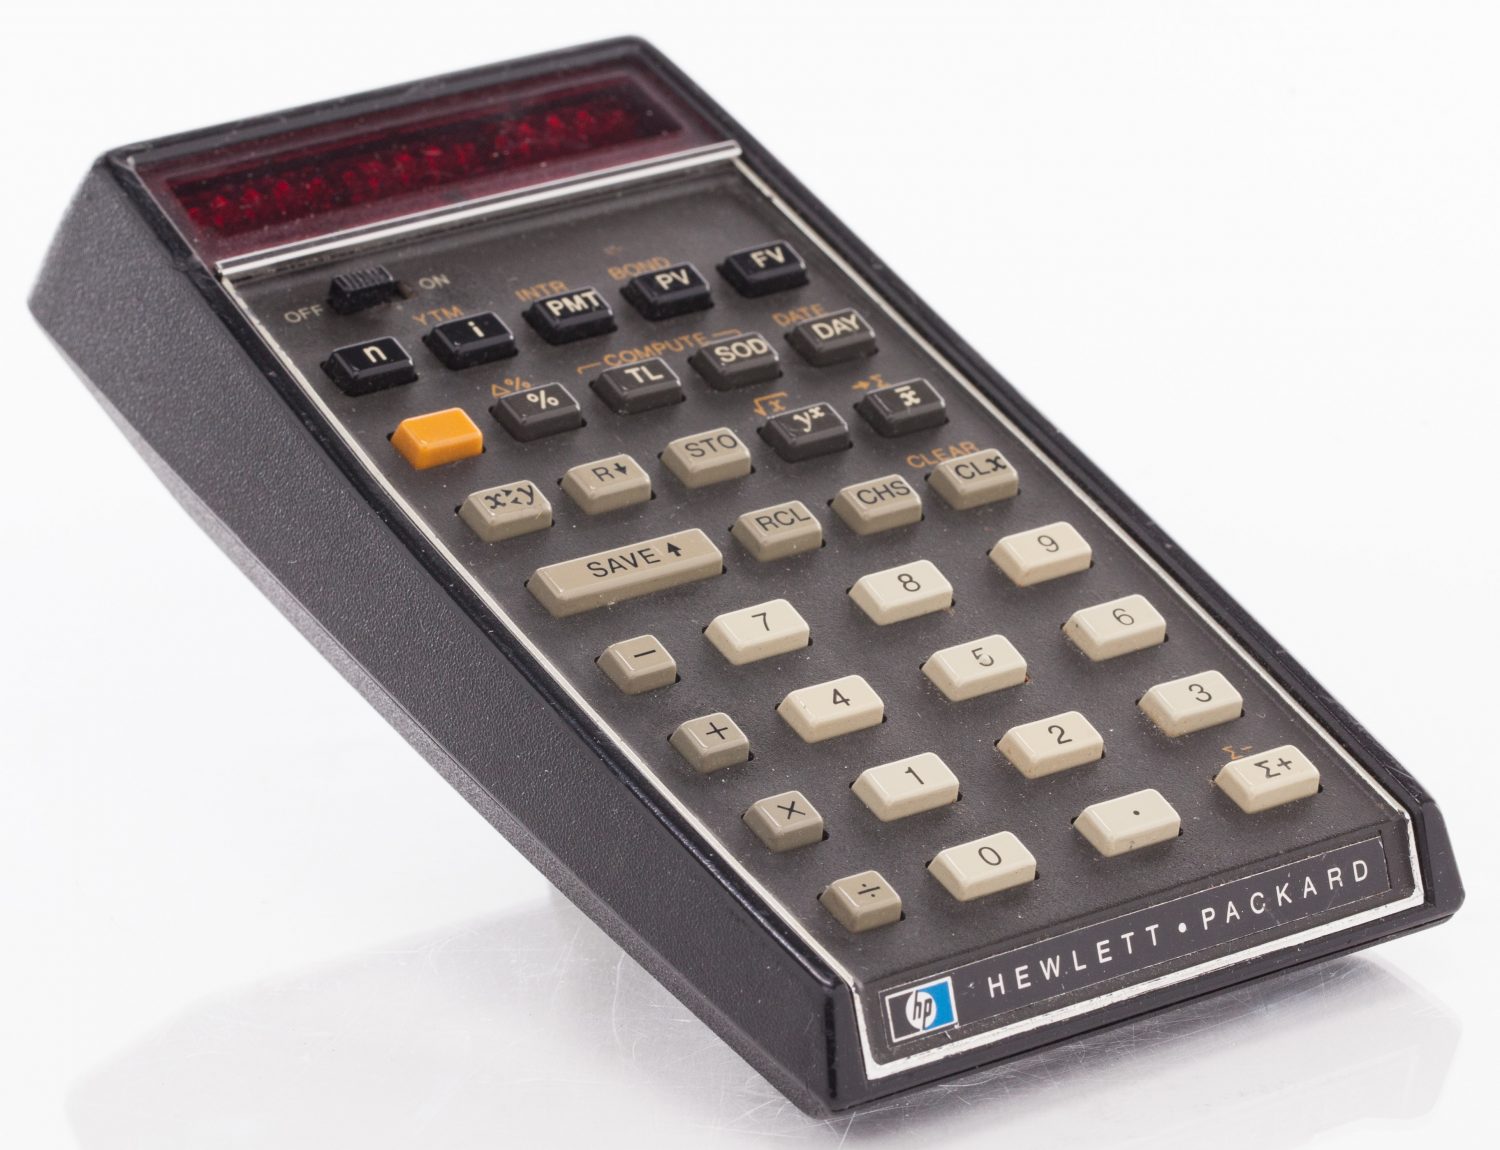 Photo of the HP 80 calculator designed for business people with 40 time-and-money formulas preset.